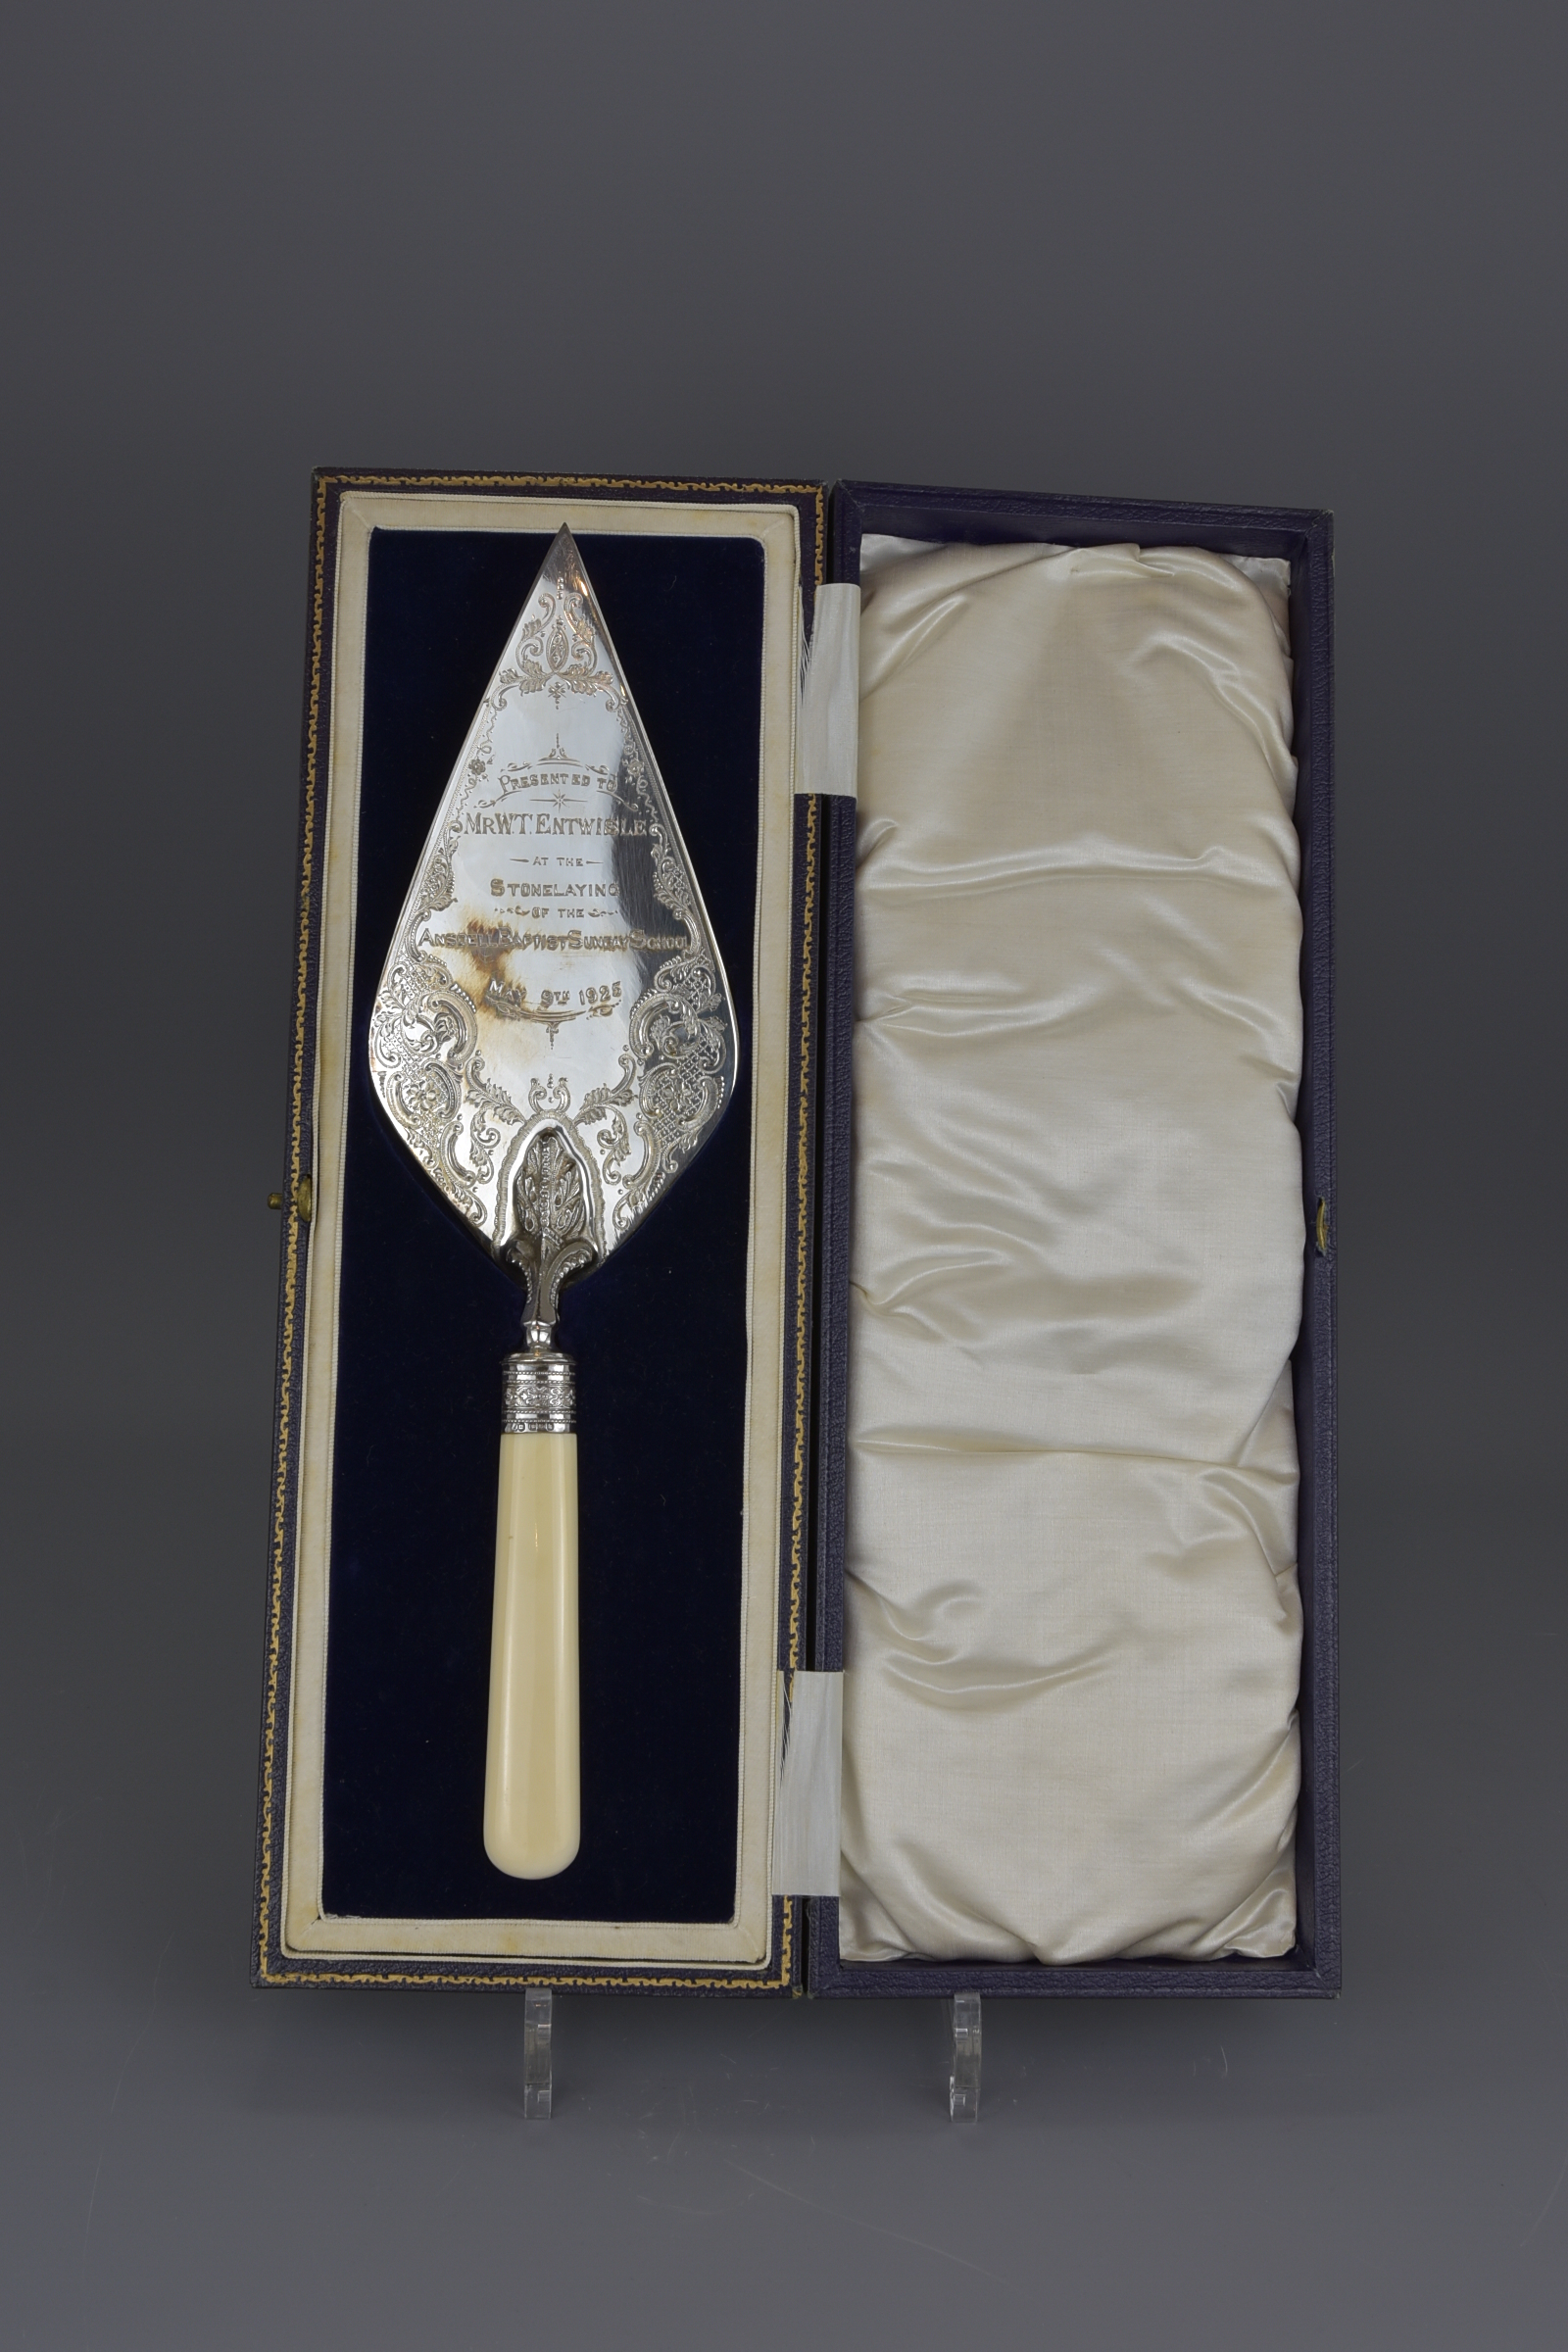 An English antique presentation trowel dated 13th